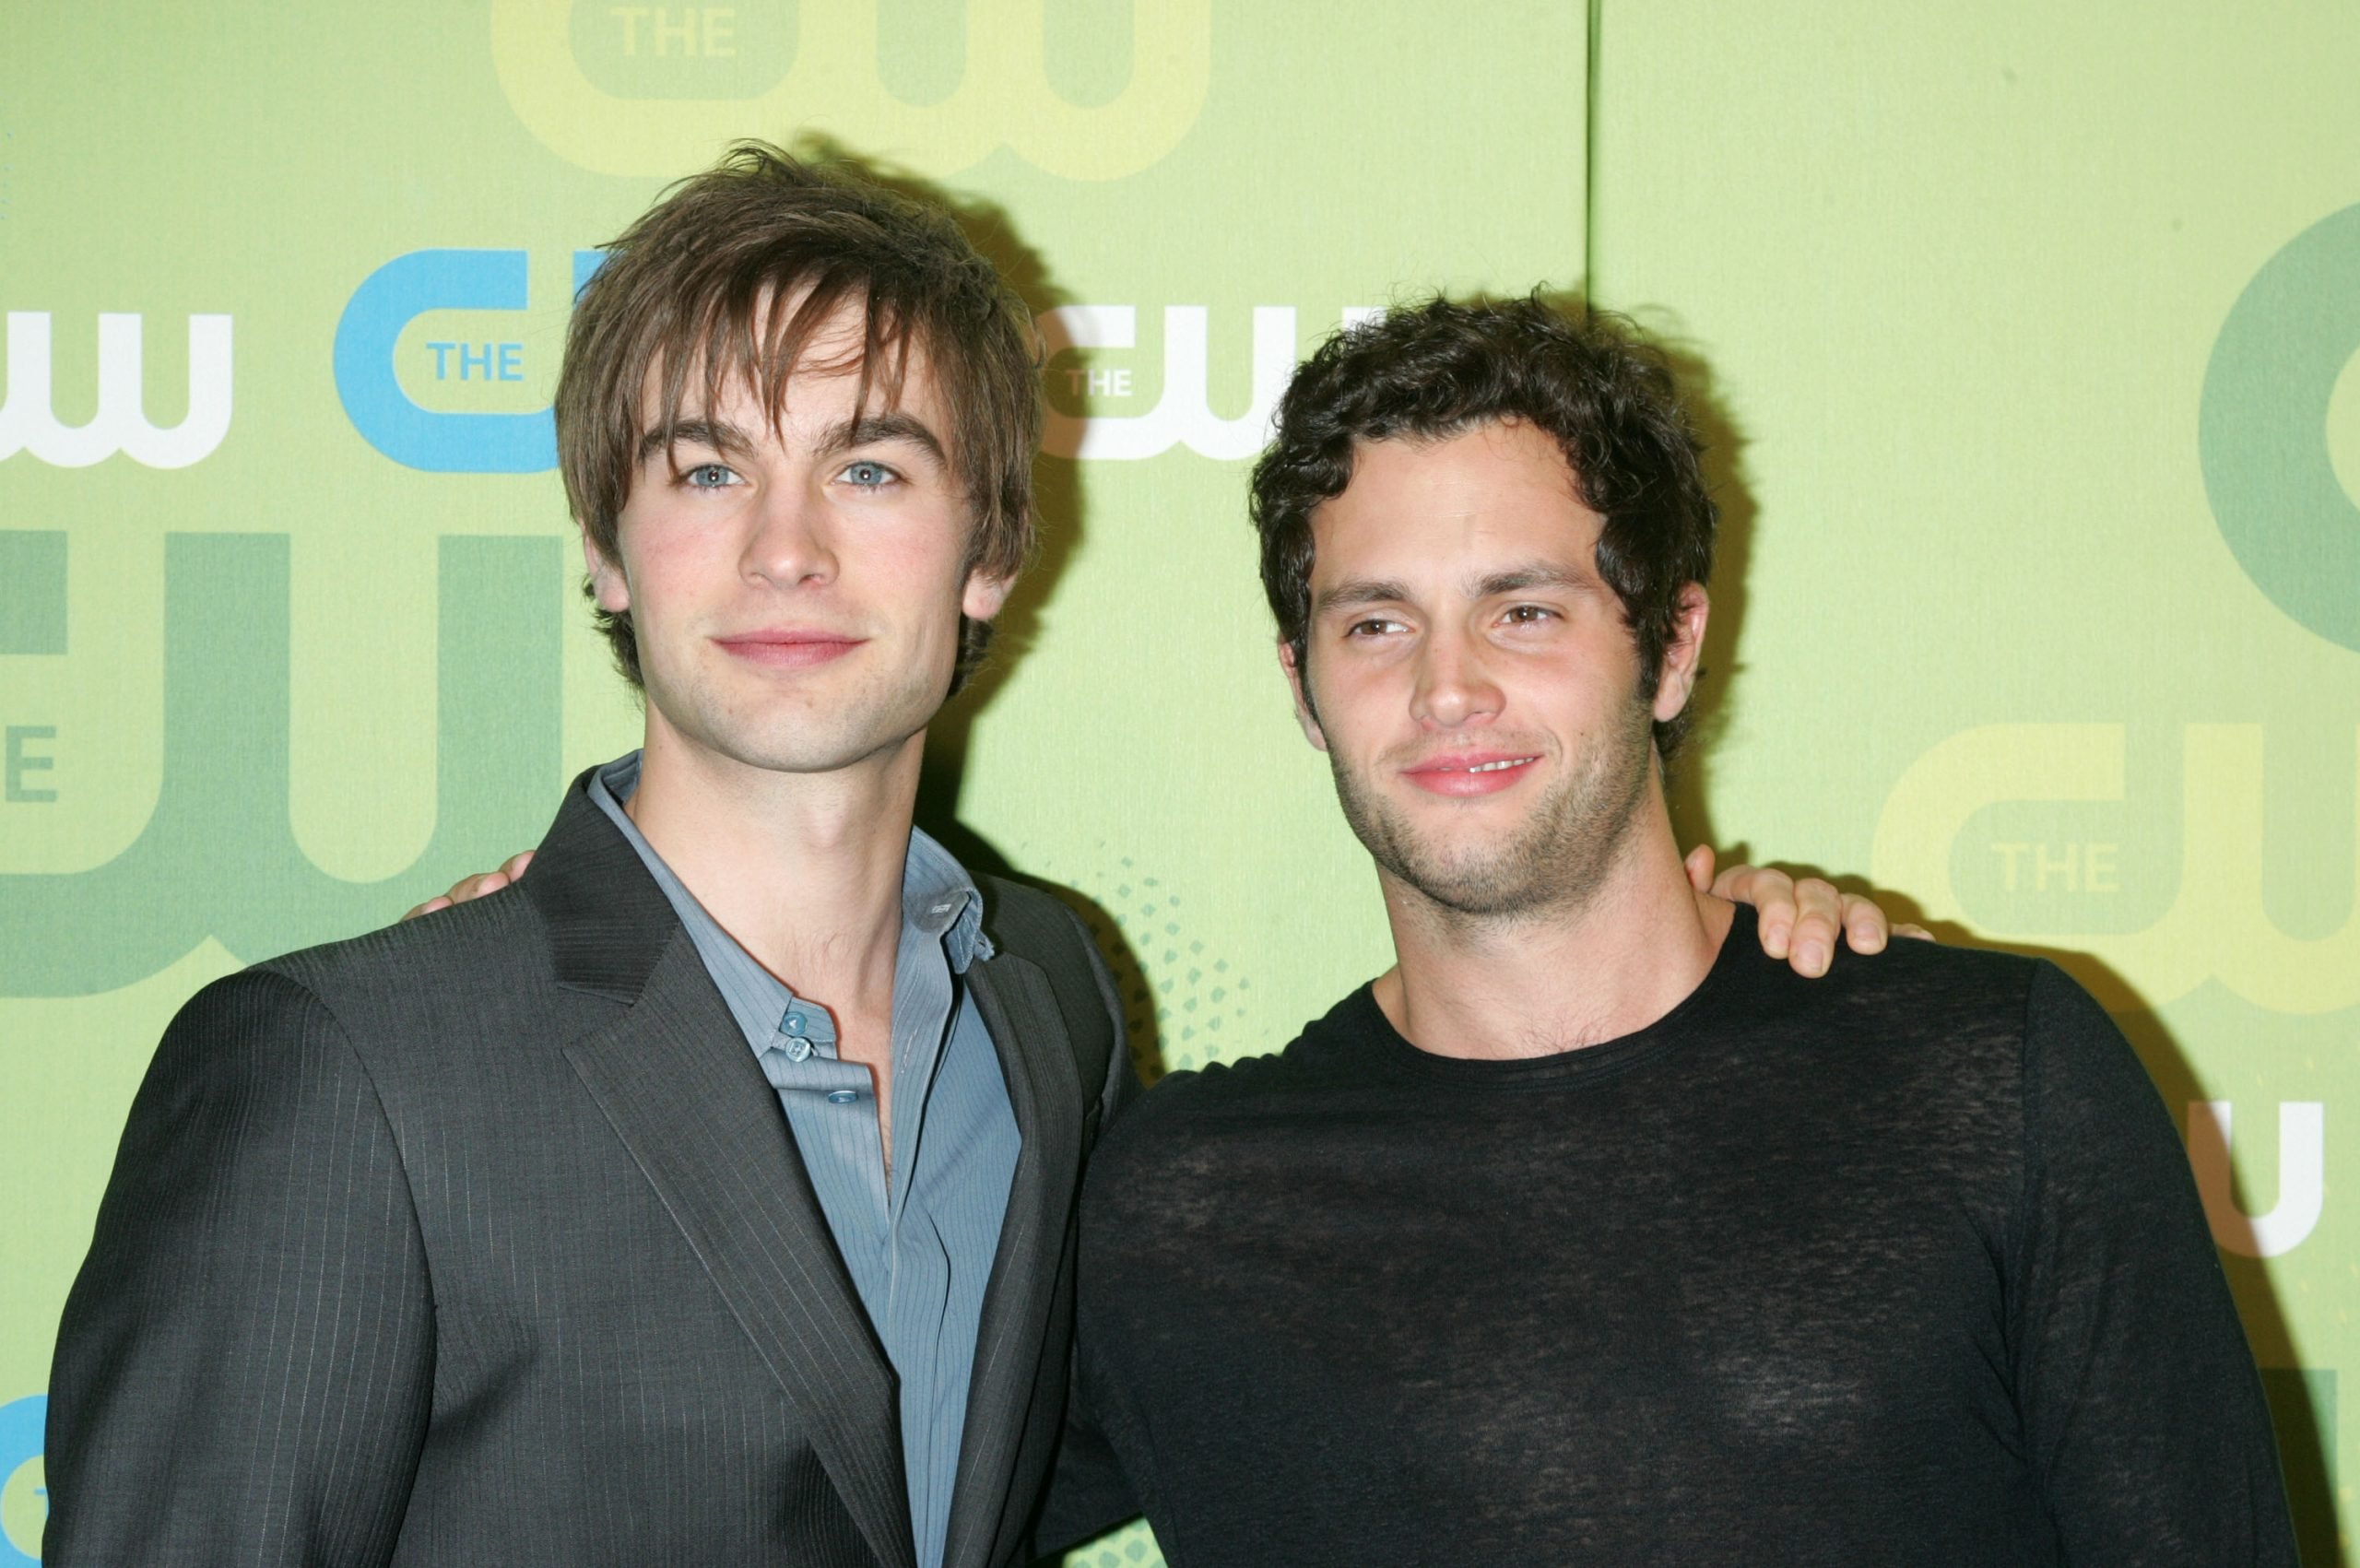 ‘Gossip Girl’: Why Chace Crawford and Penn Badgley Say the Show Was ‘Ahead of Its Time’